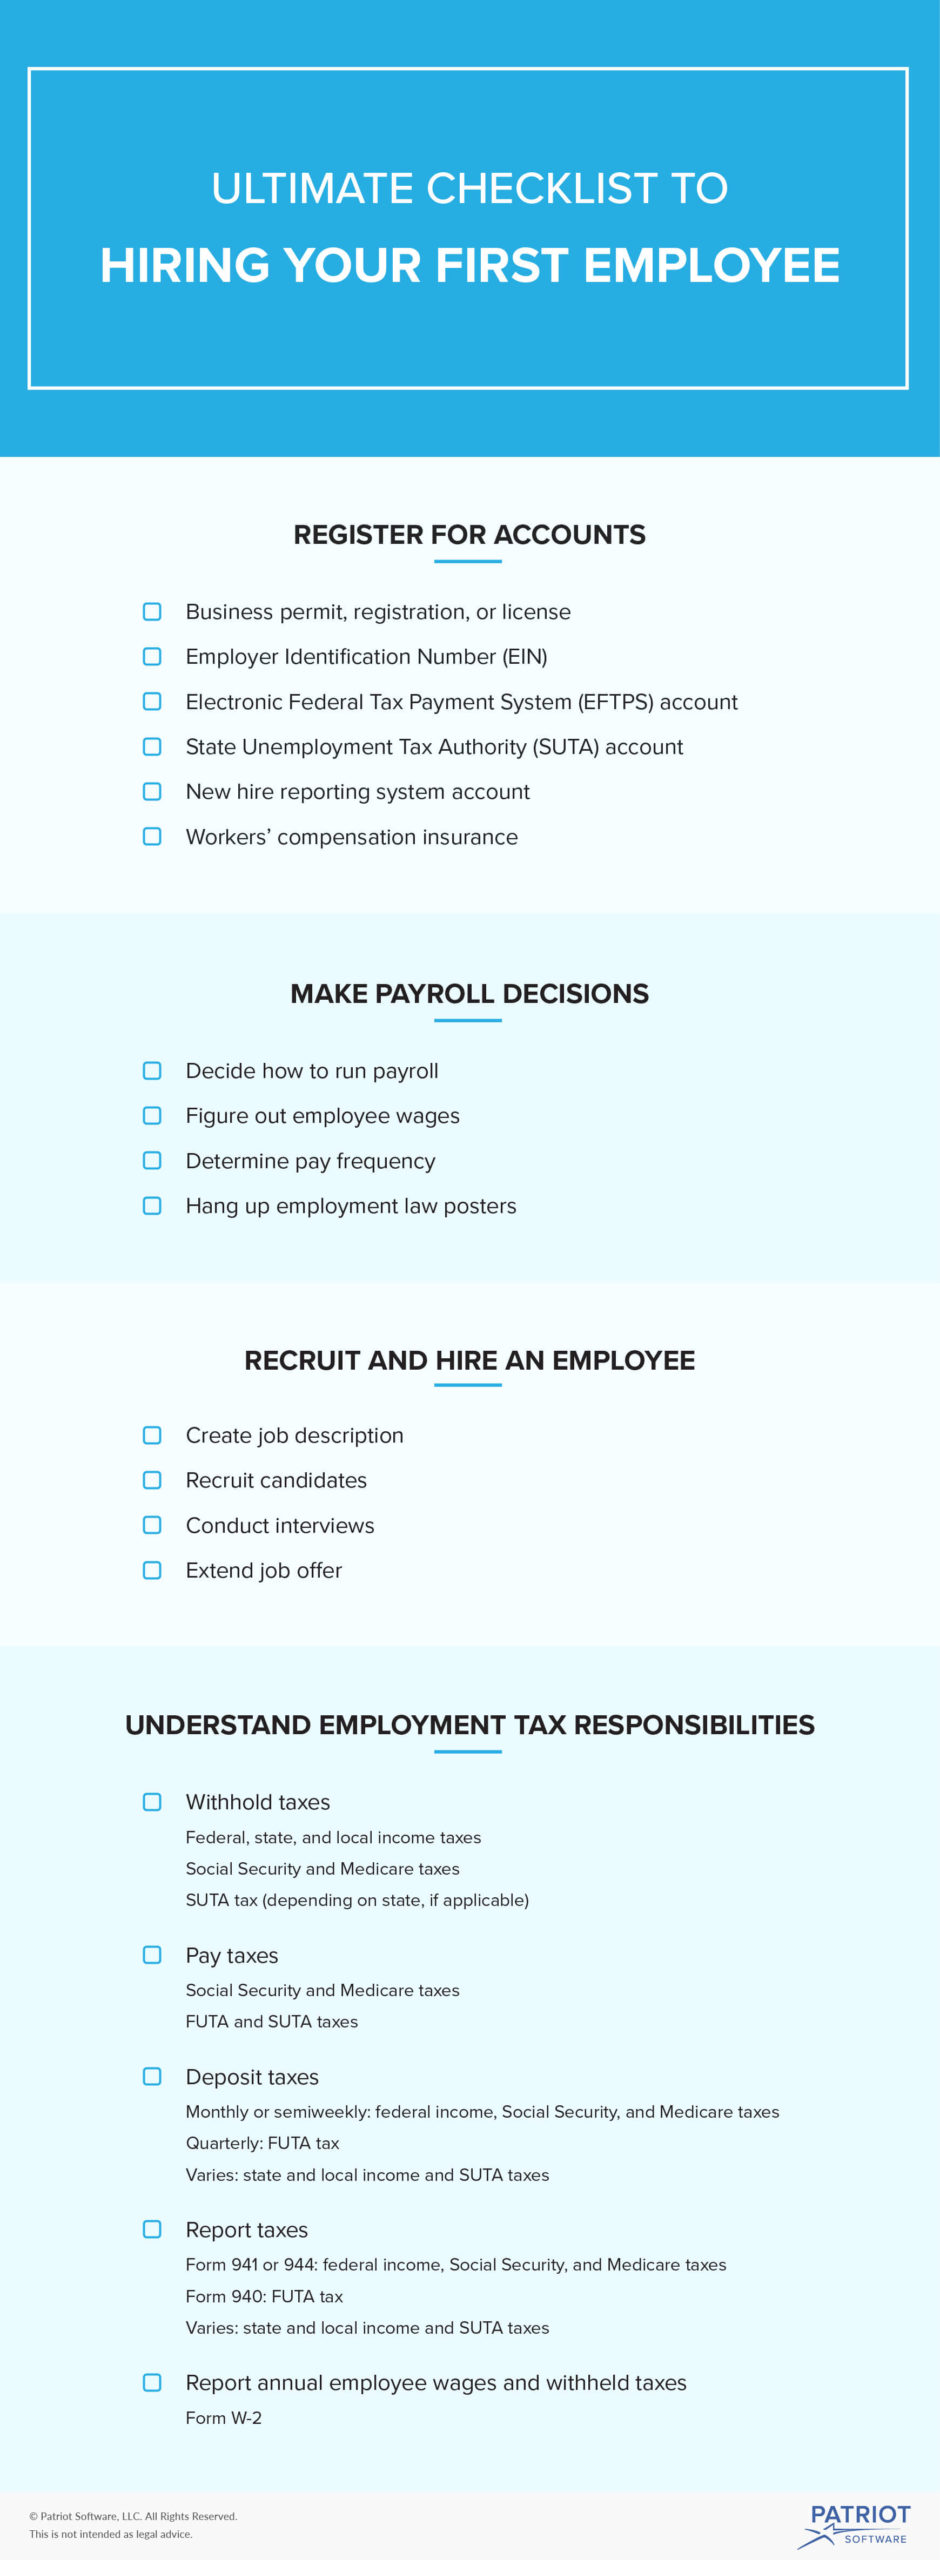 how to hire your first employee